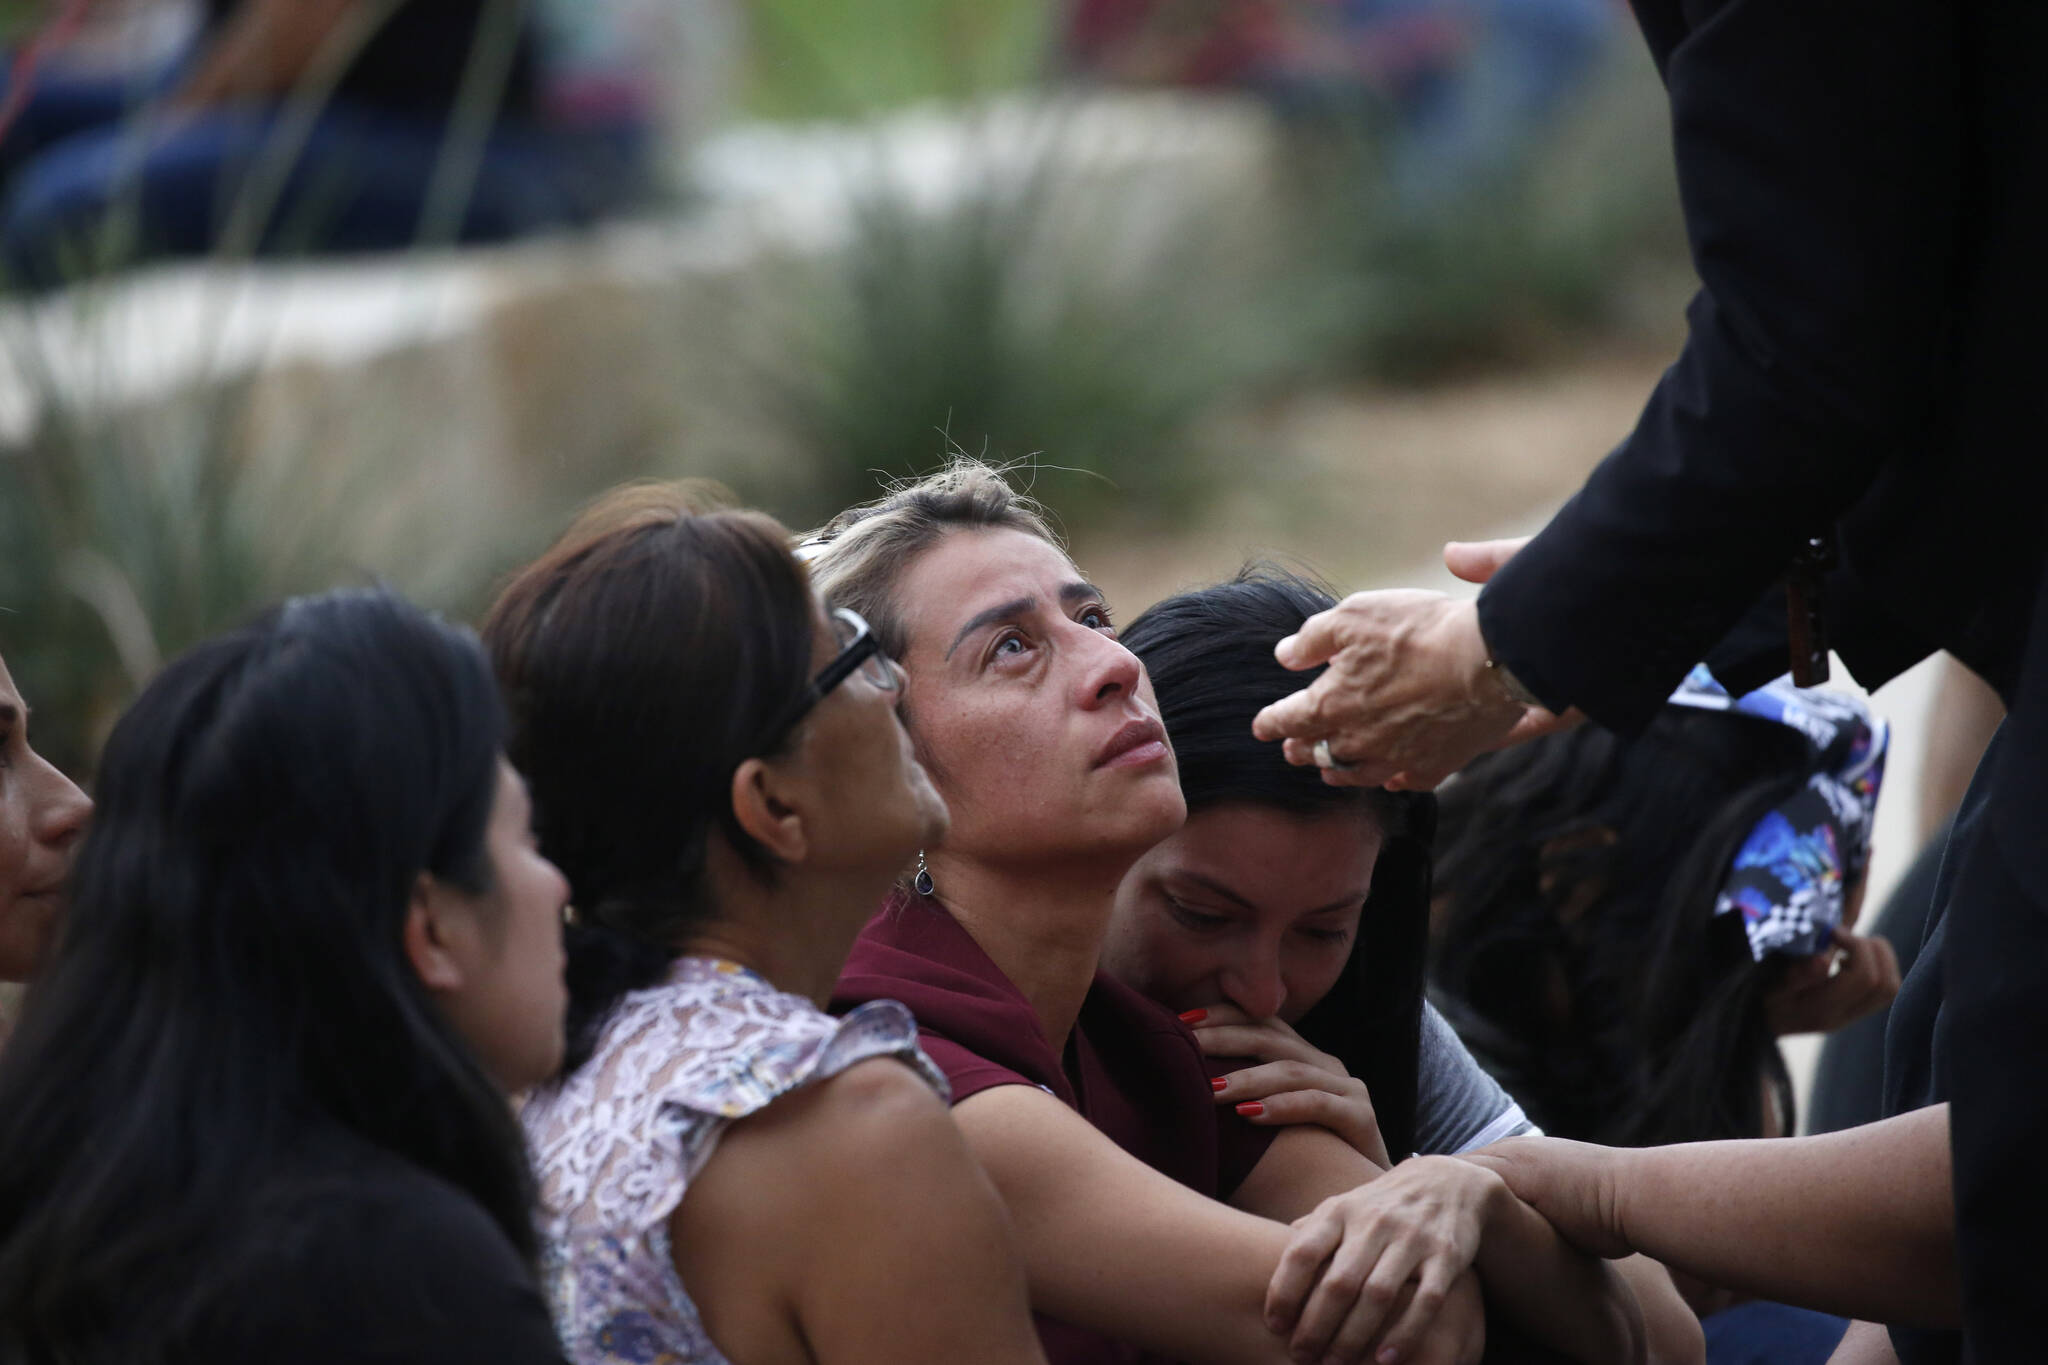 The archbishop of San Antonio, Gustavo Garcia-Siller, comforts families outside of the Civic Center in Uvalde, Texas Tuesday, May 24, 2022. (AP Photo / Dario Lopez-Mills)